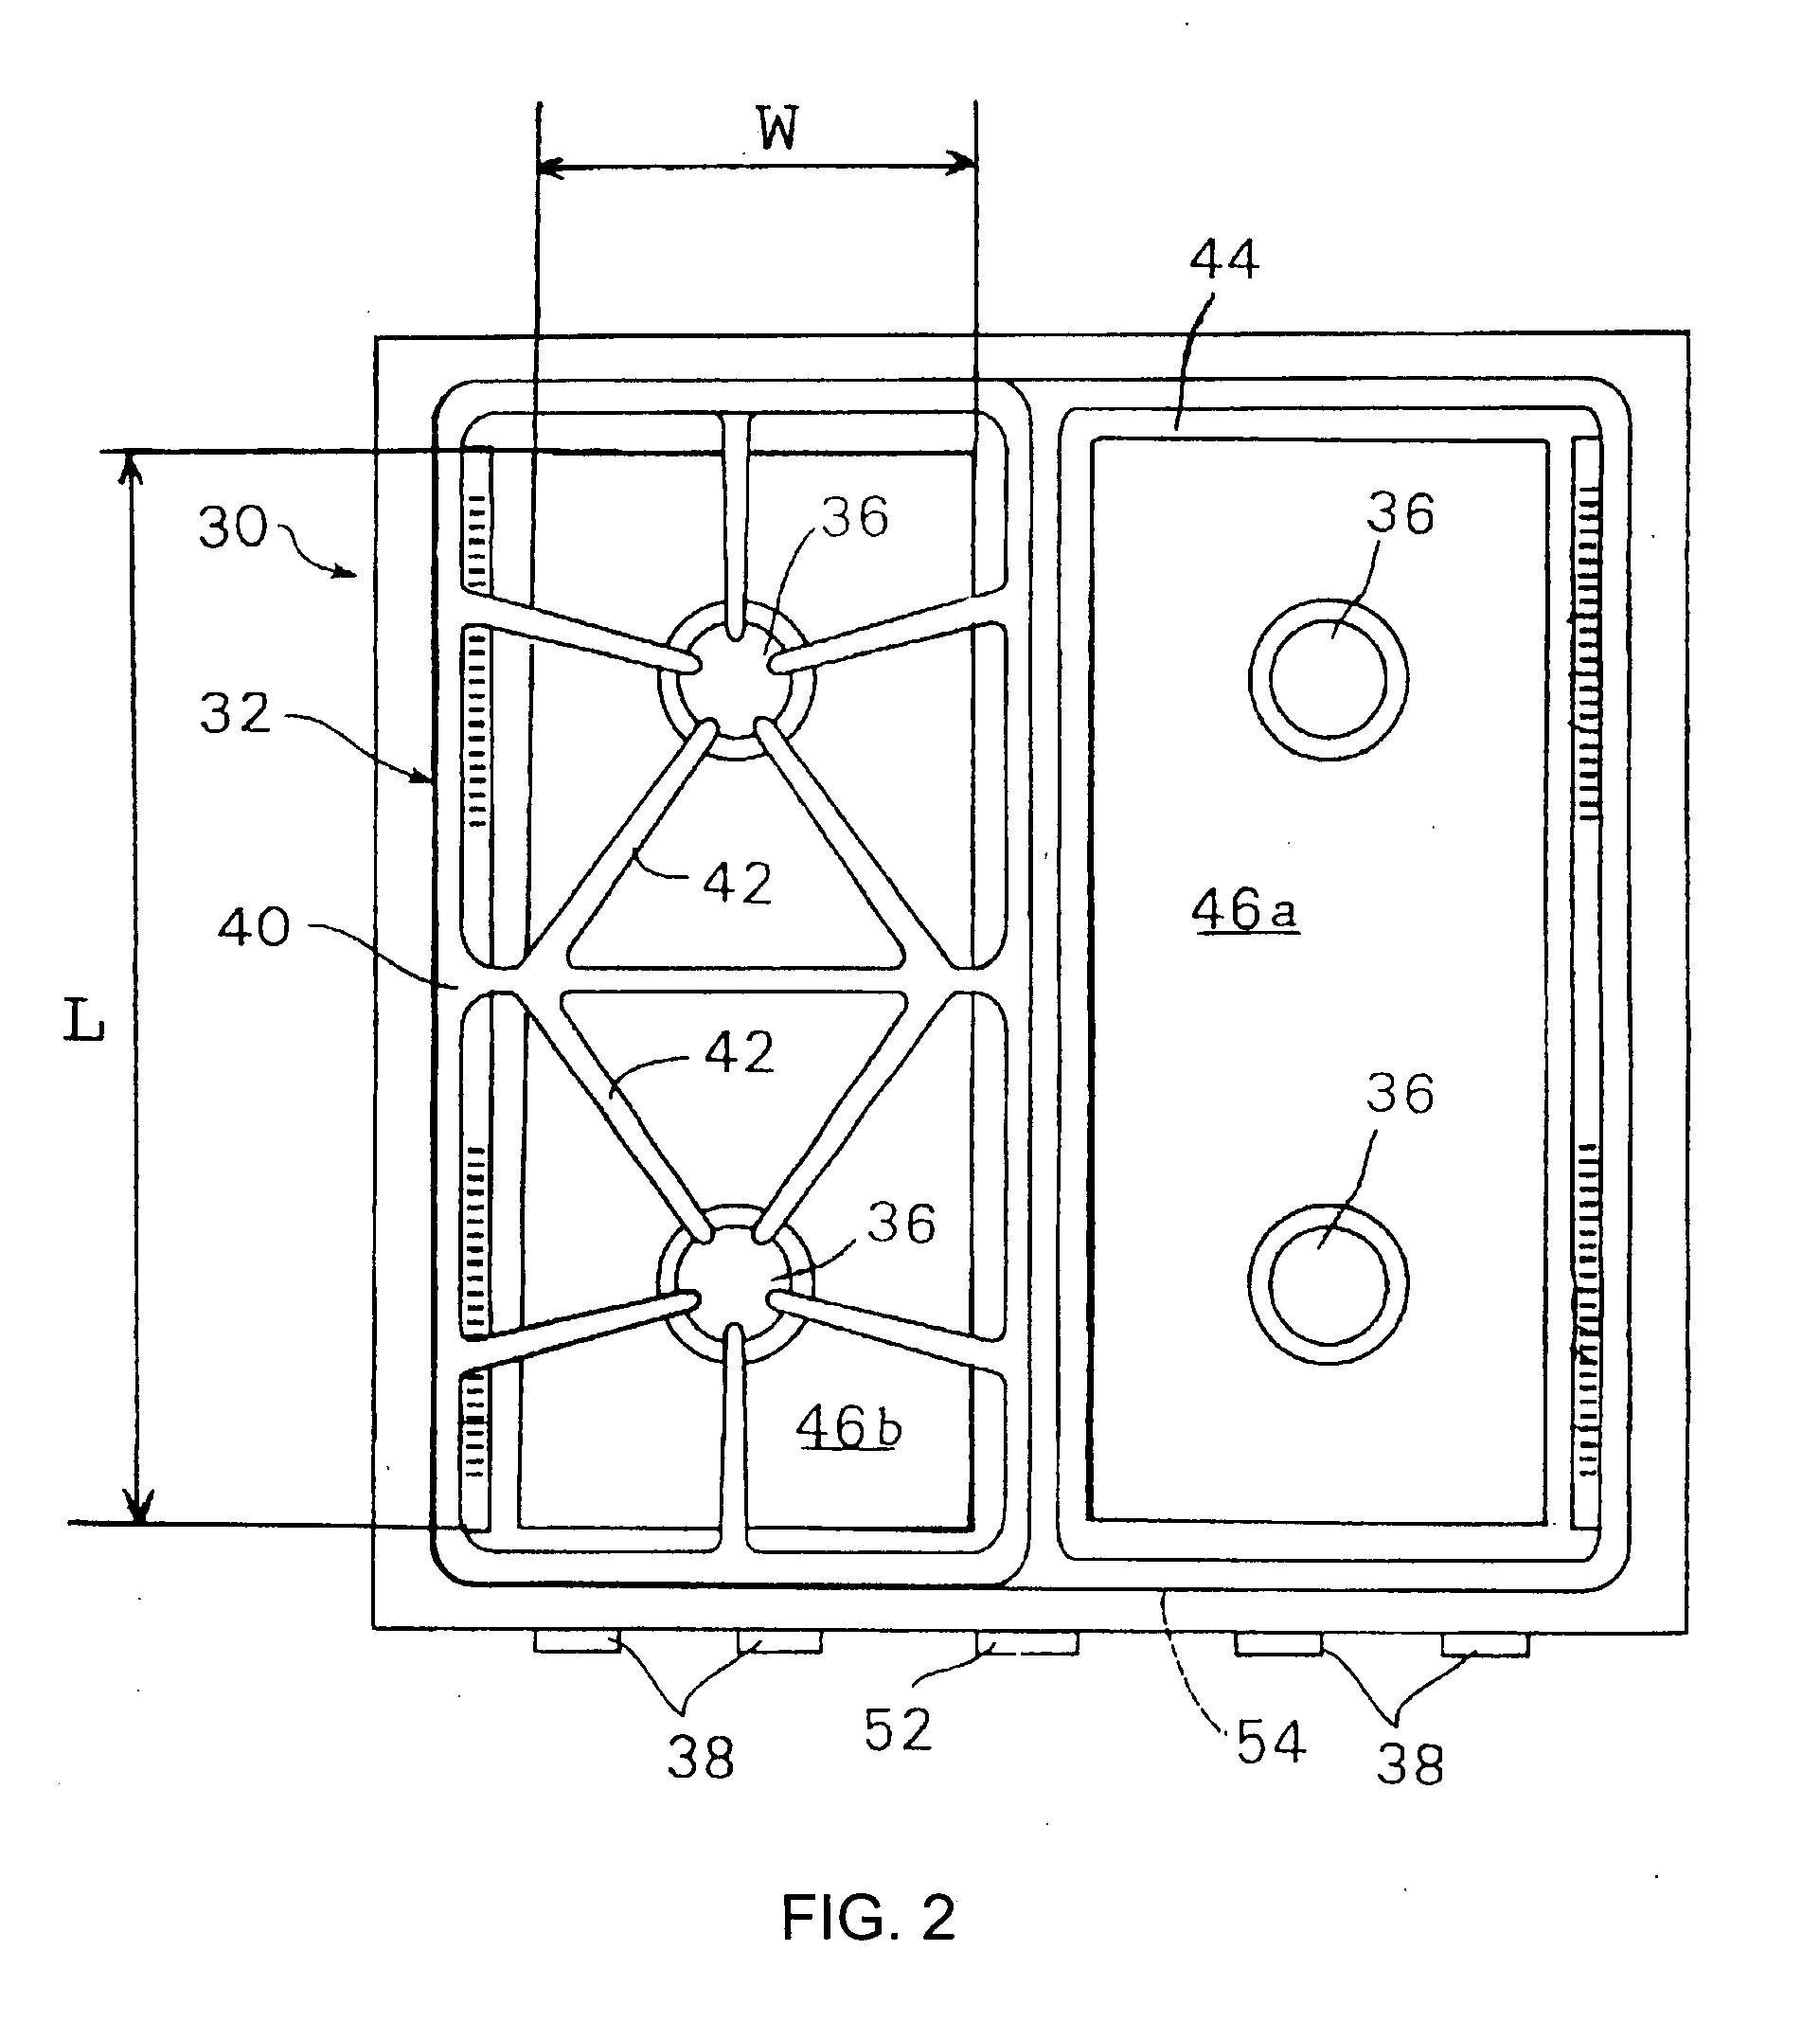 Removable flame heat regulating apparatus including an inner hollow shell and an outer wall for a burner of a gas stove